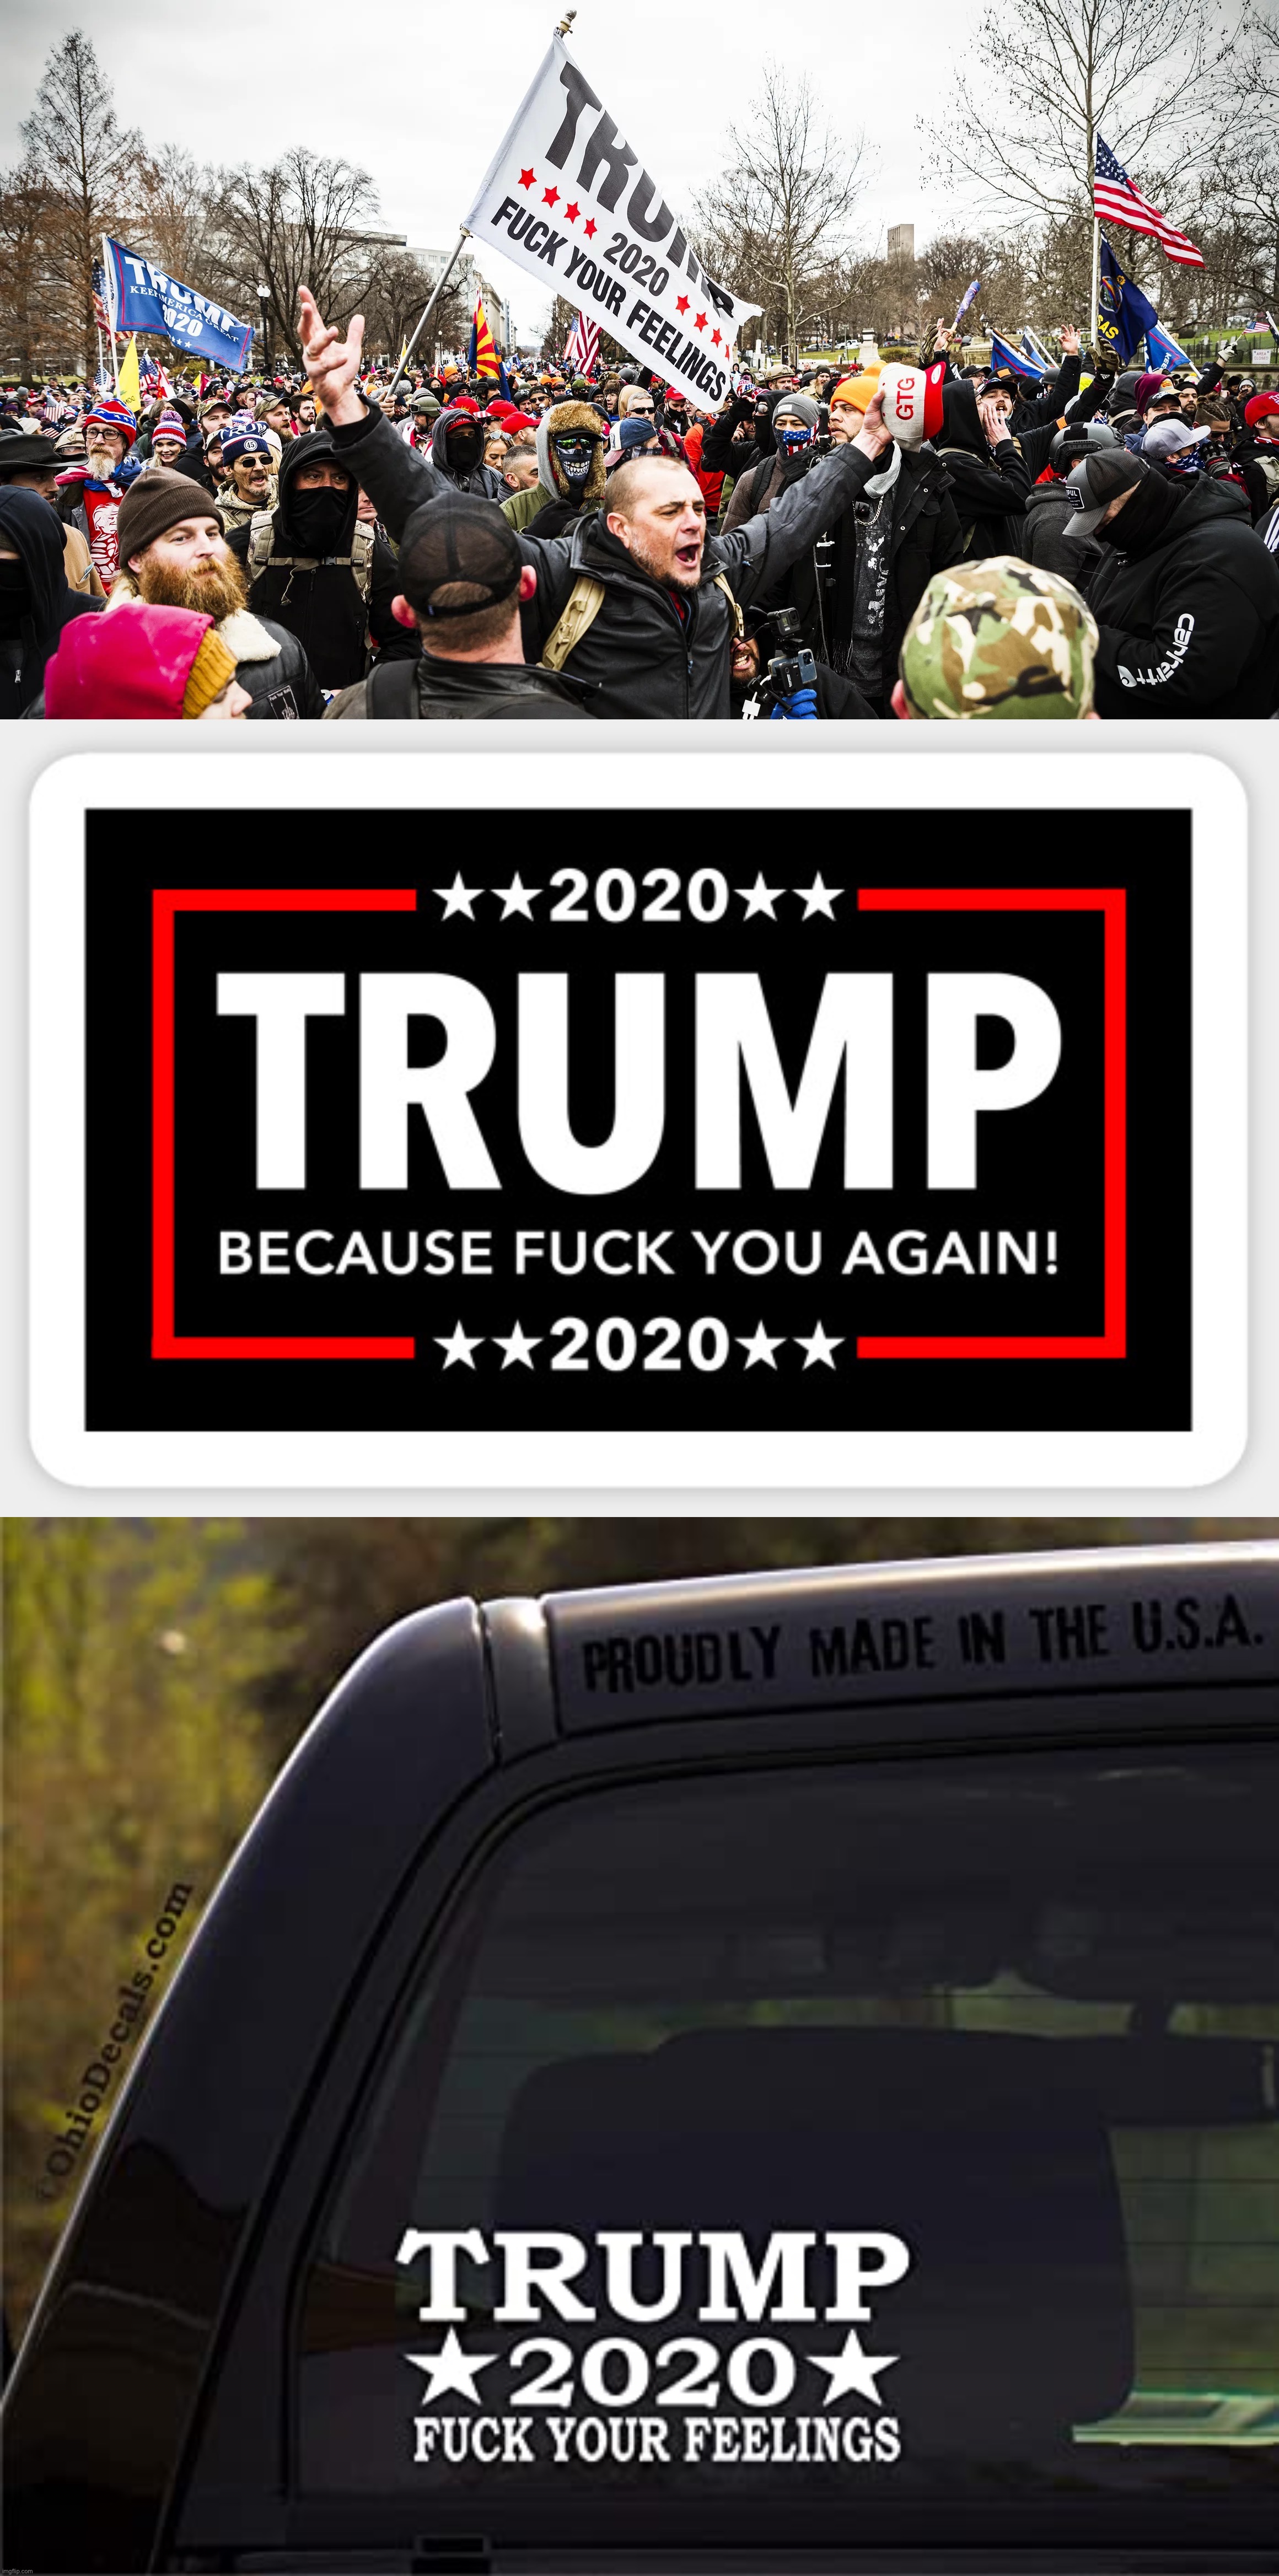 all Republicans want is uuuuuuuunityyyyyyyyy | image tagged in trump riot,trump 2020 because fuck you again,trump 2020 fuck your feelings | made w/ Imgflip meme maker